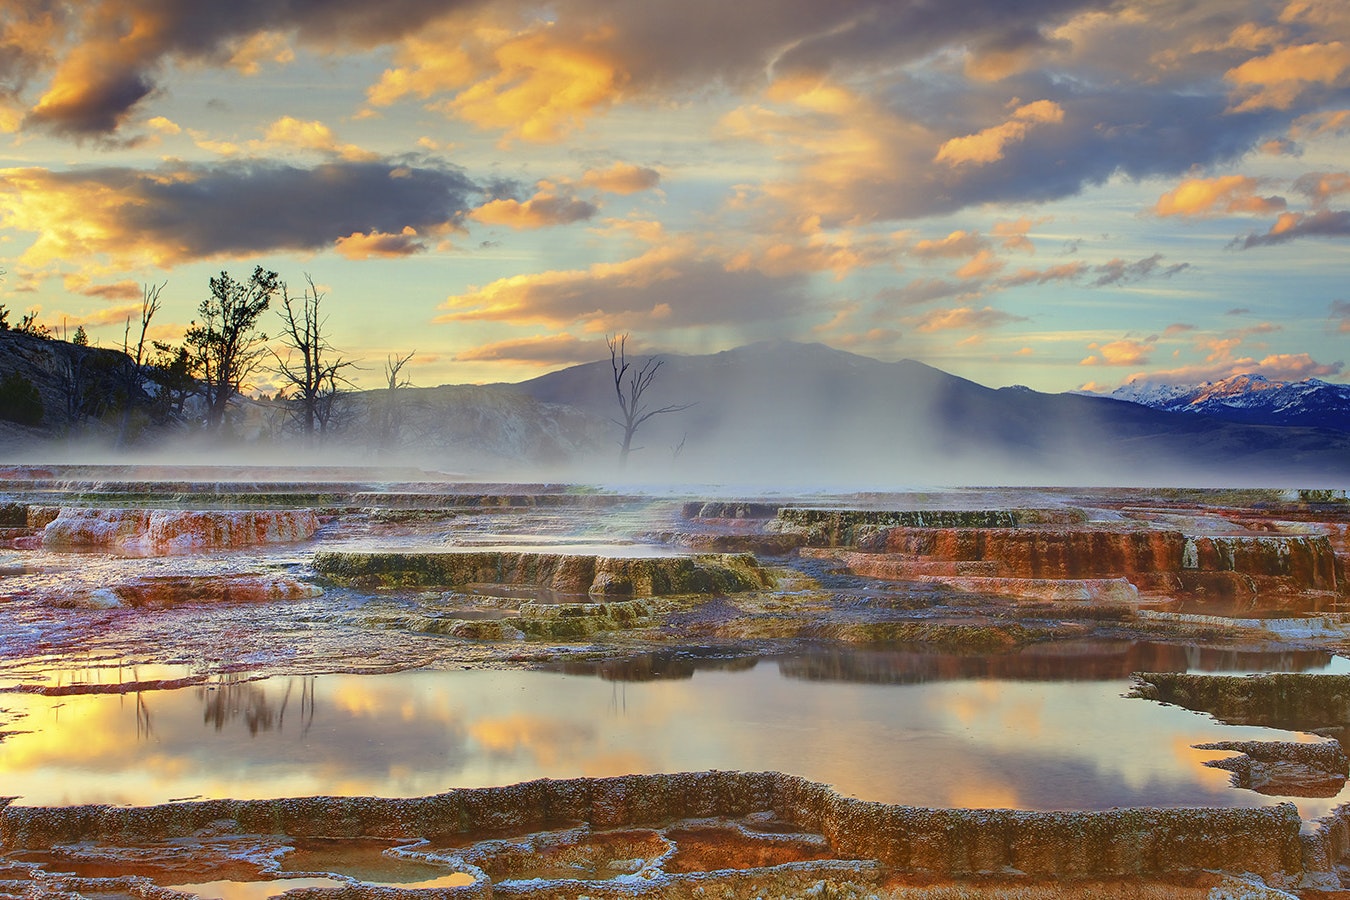 Yellowstone is a hotbed for geothermal activity, like Mammoth Hot Springs pictured here. But developing geothermal elsewhere in Wyoming still is more theoretical than practical.